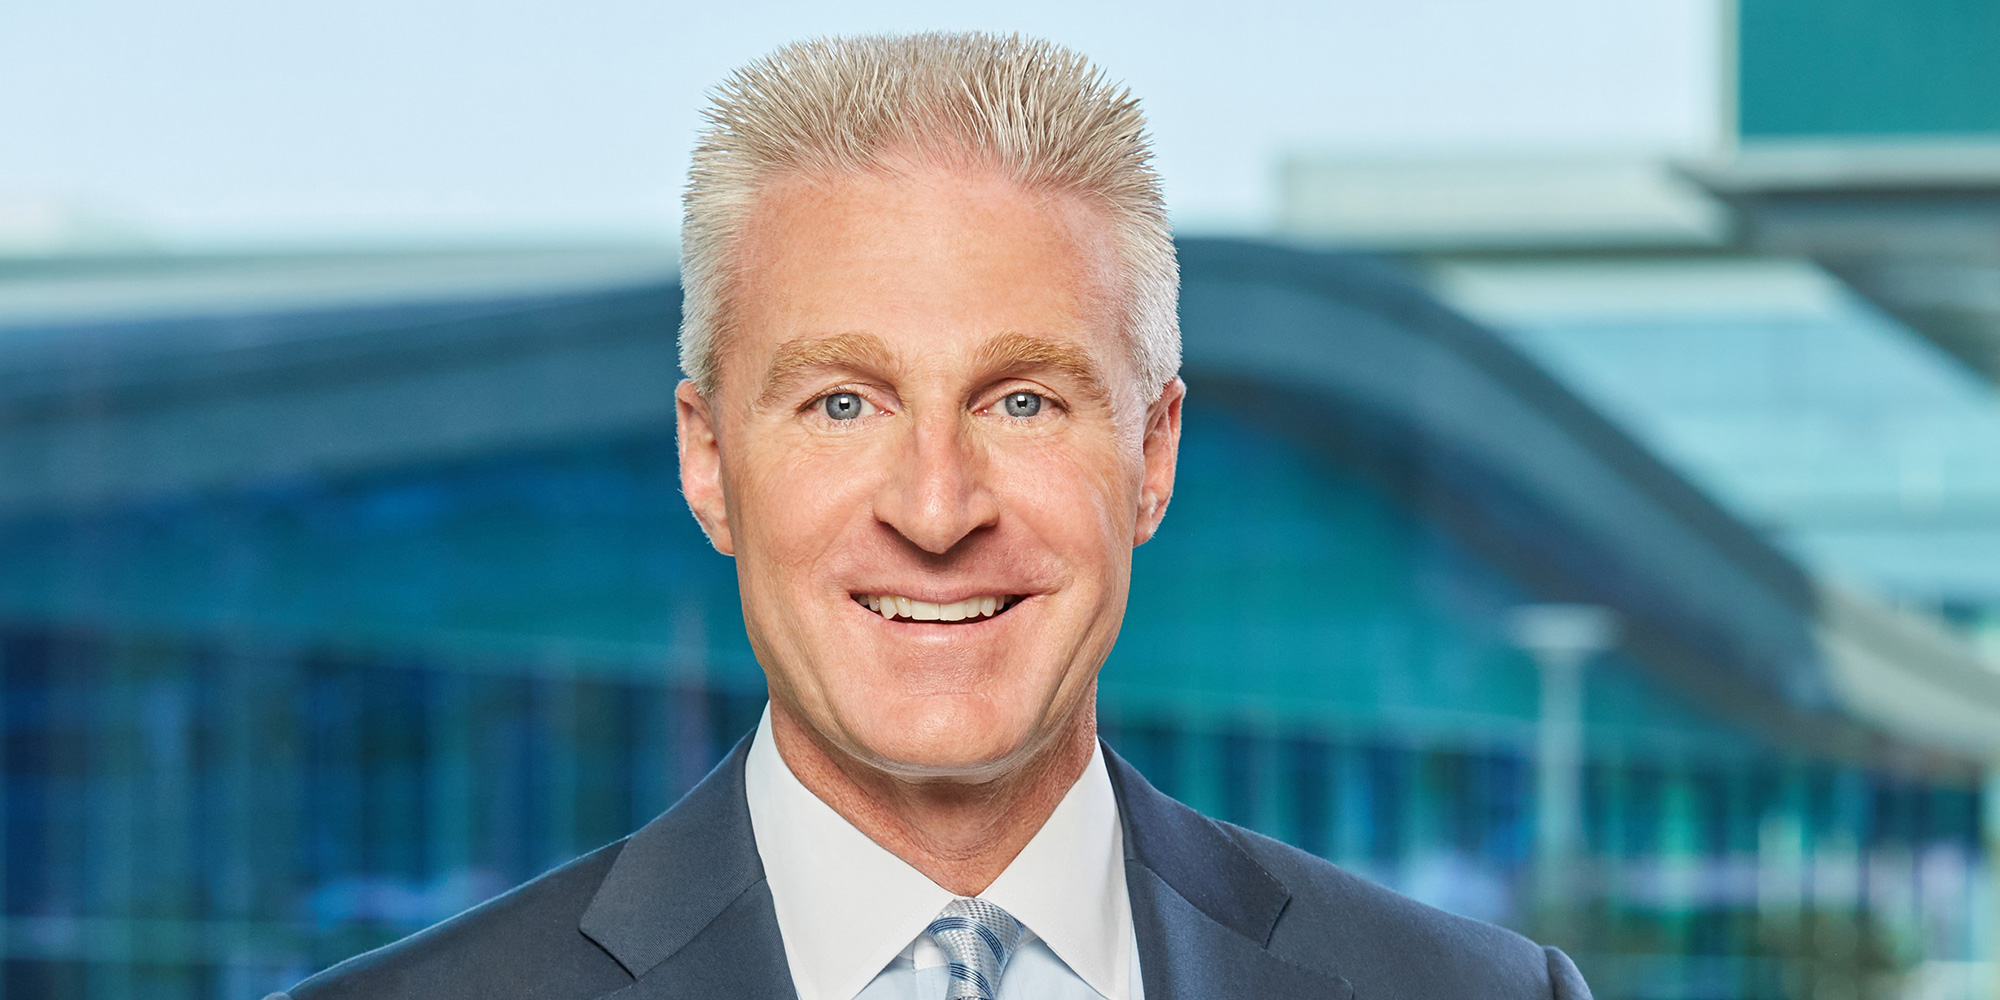 Jack Hollis leads all sales, marketing, and market representation for Toyota North America.